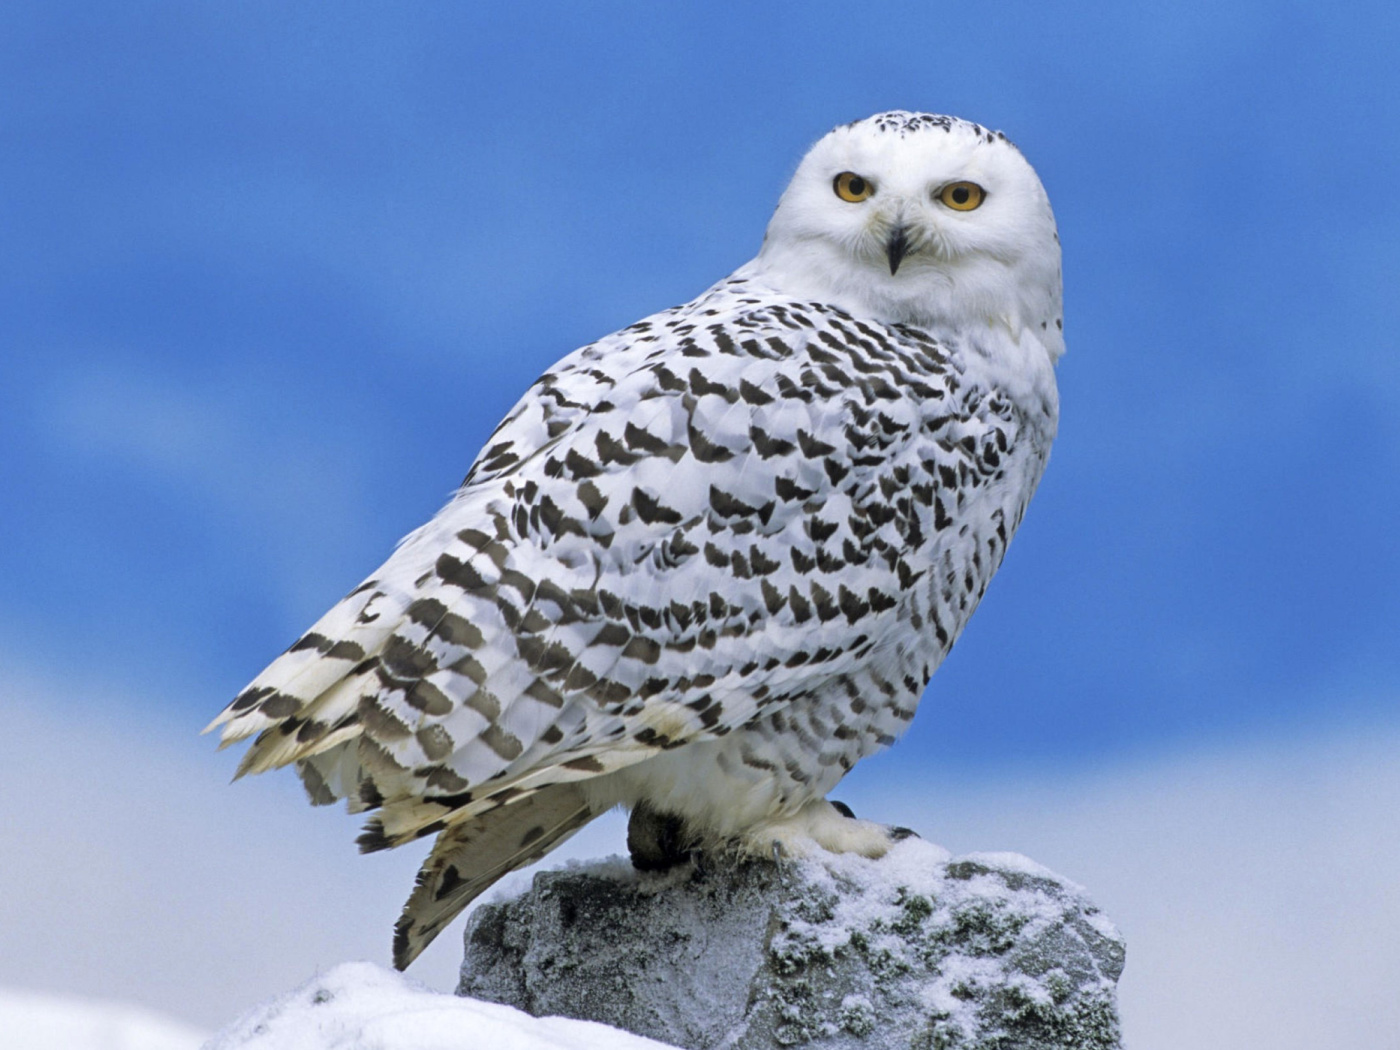 Snowy owl from Arctic wallpaper 1400x1050